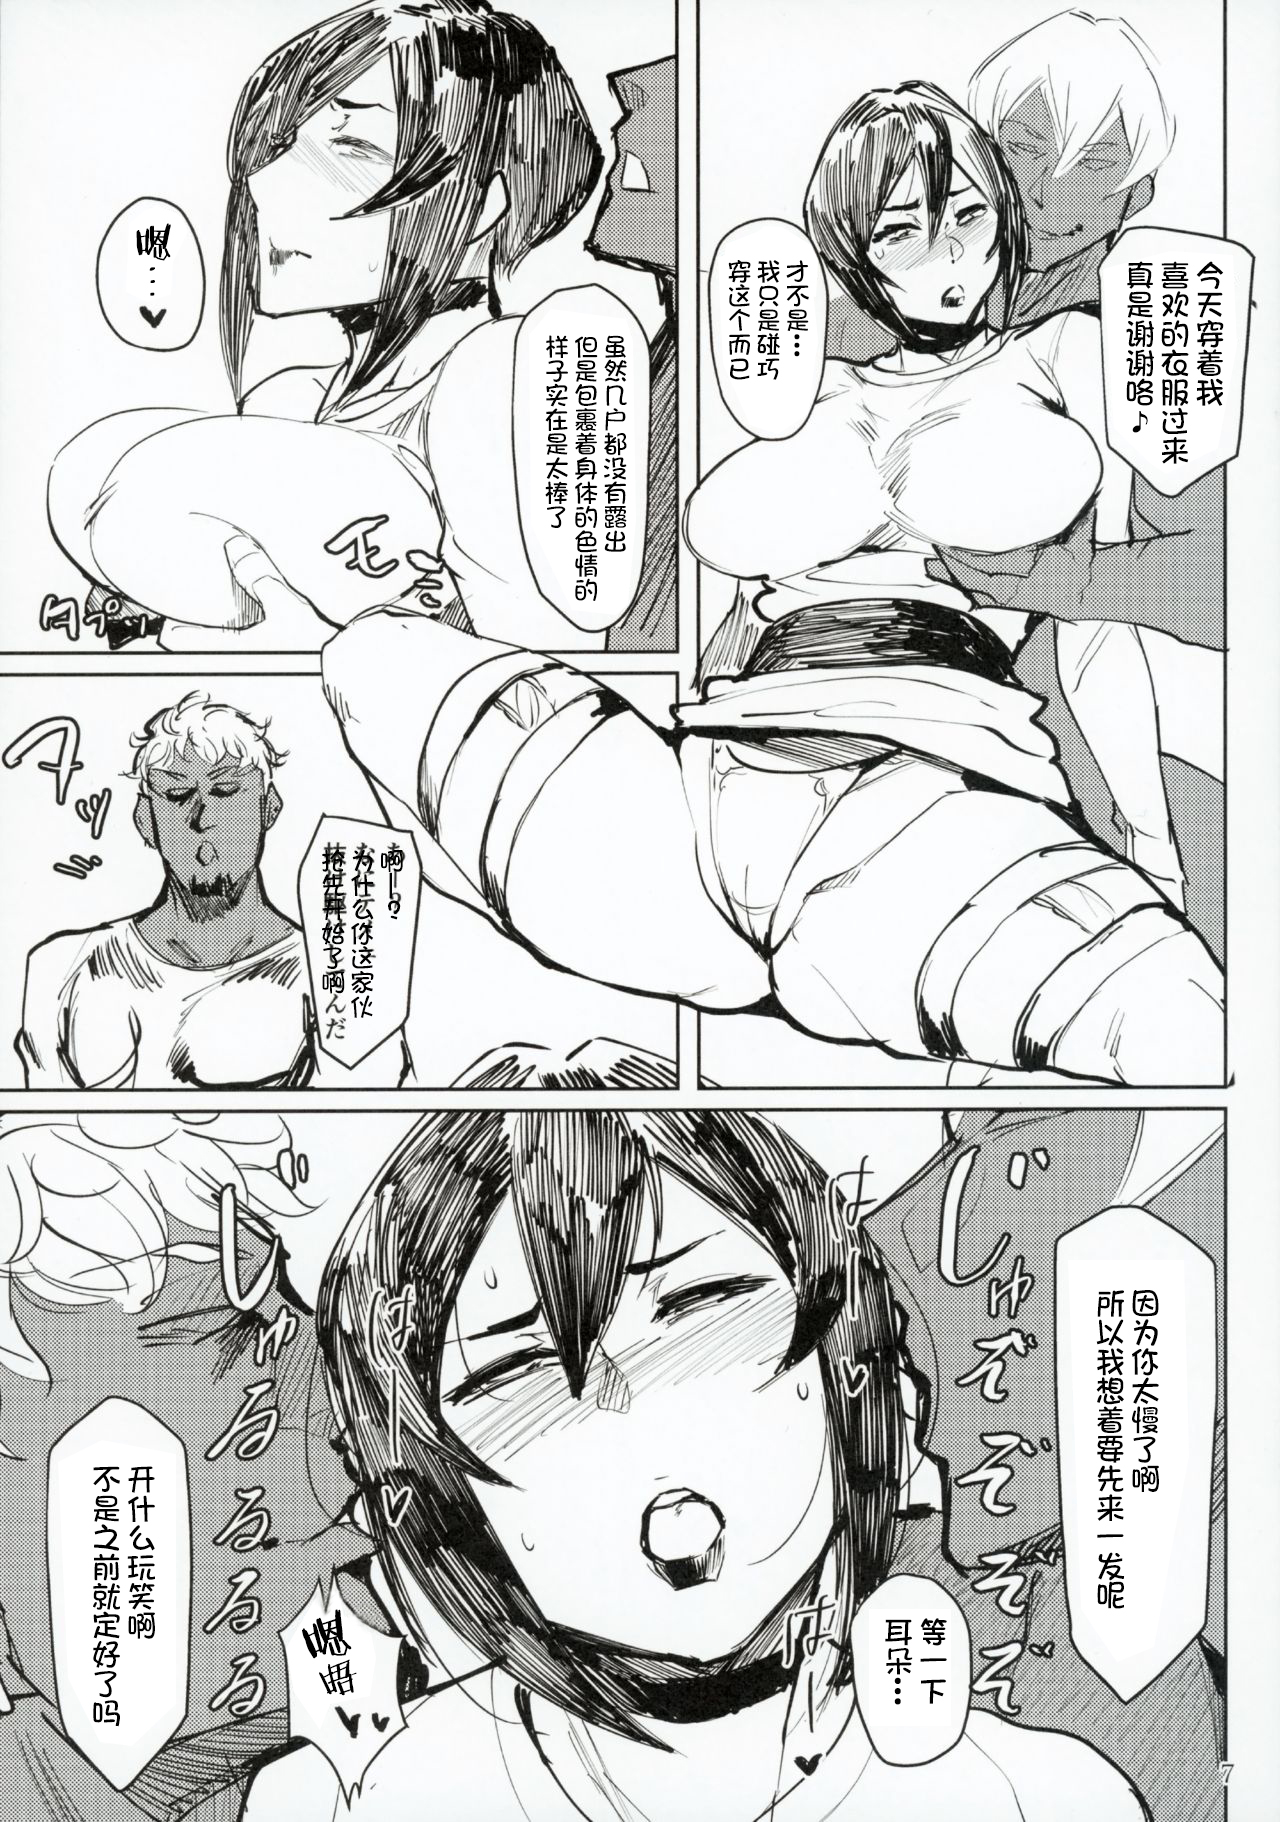 (COMITIA124) [Isocurve (Allegro)] Yukari Special EXtra FRIEND + Omake Paper [Chinese] [不咕鸟汉化组] page 6 full